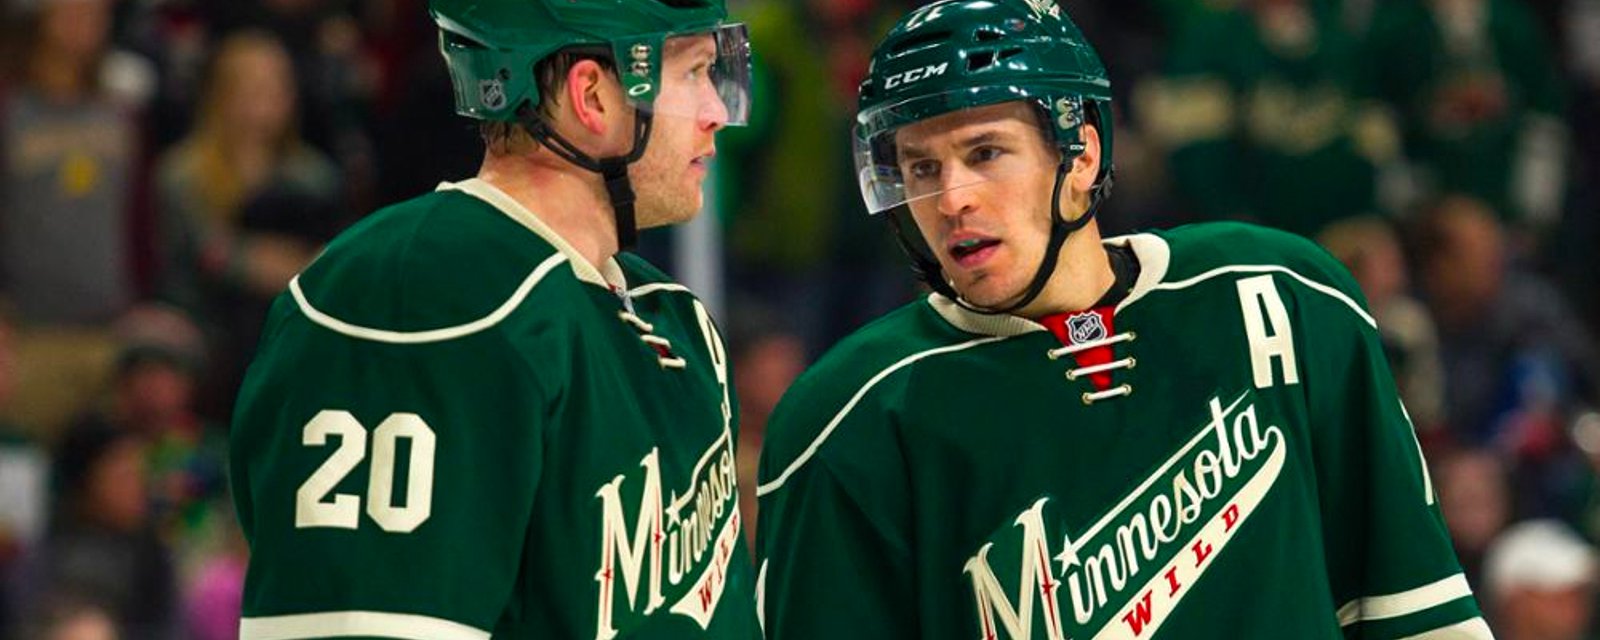 Report: Both Parise and Suter heading to the Islanders